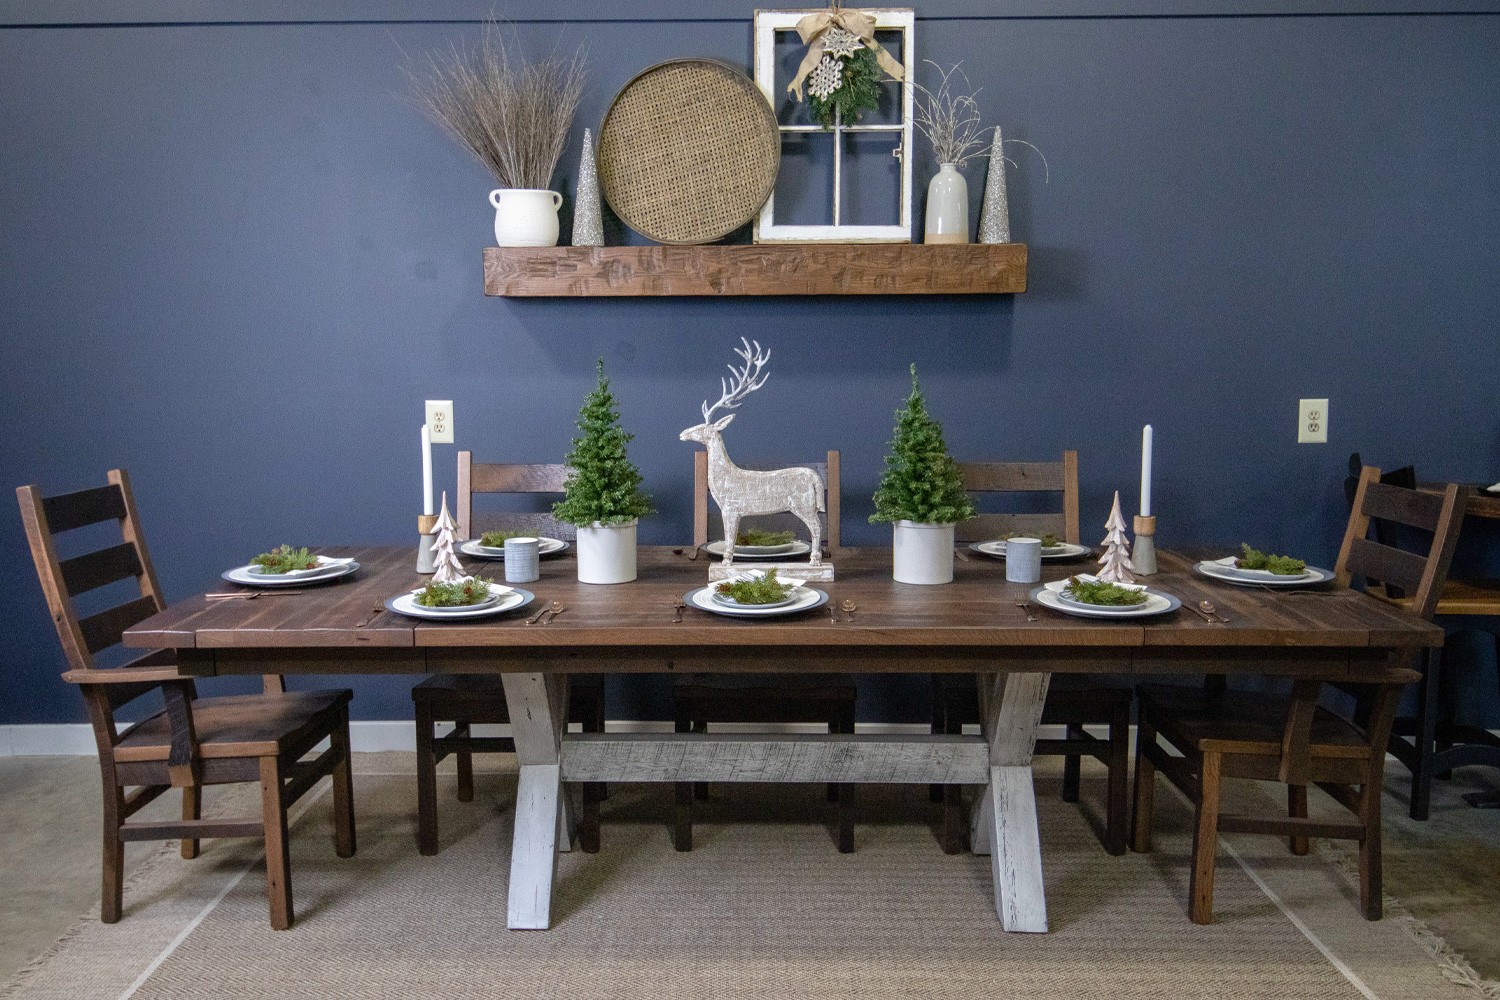 How to Transition from Christmas to Winter Decor